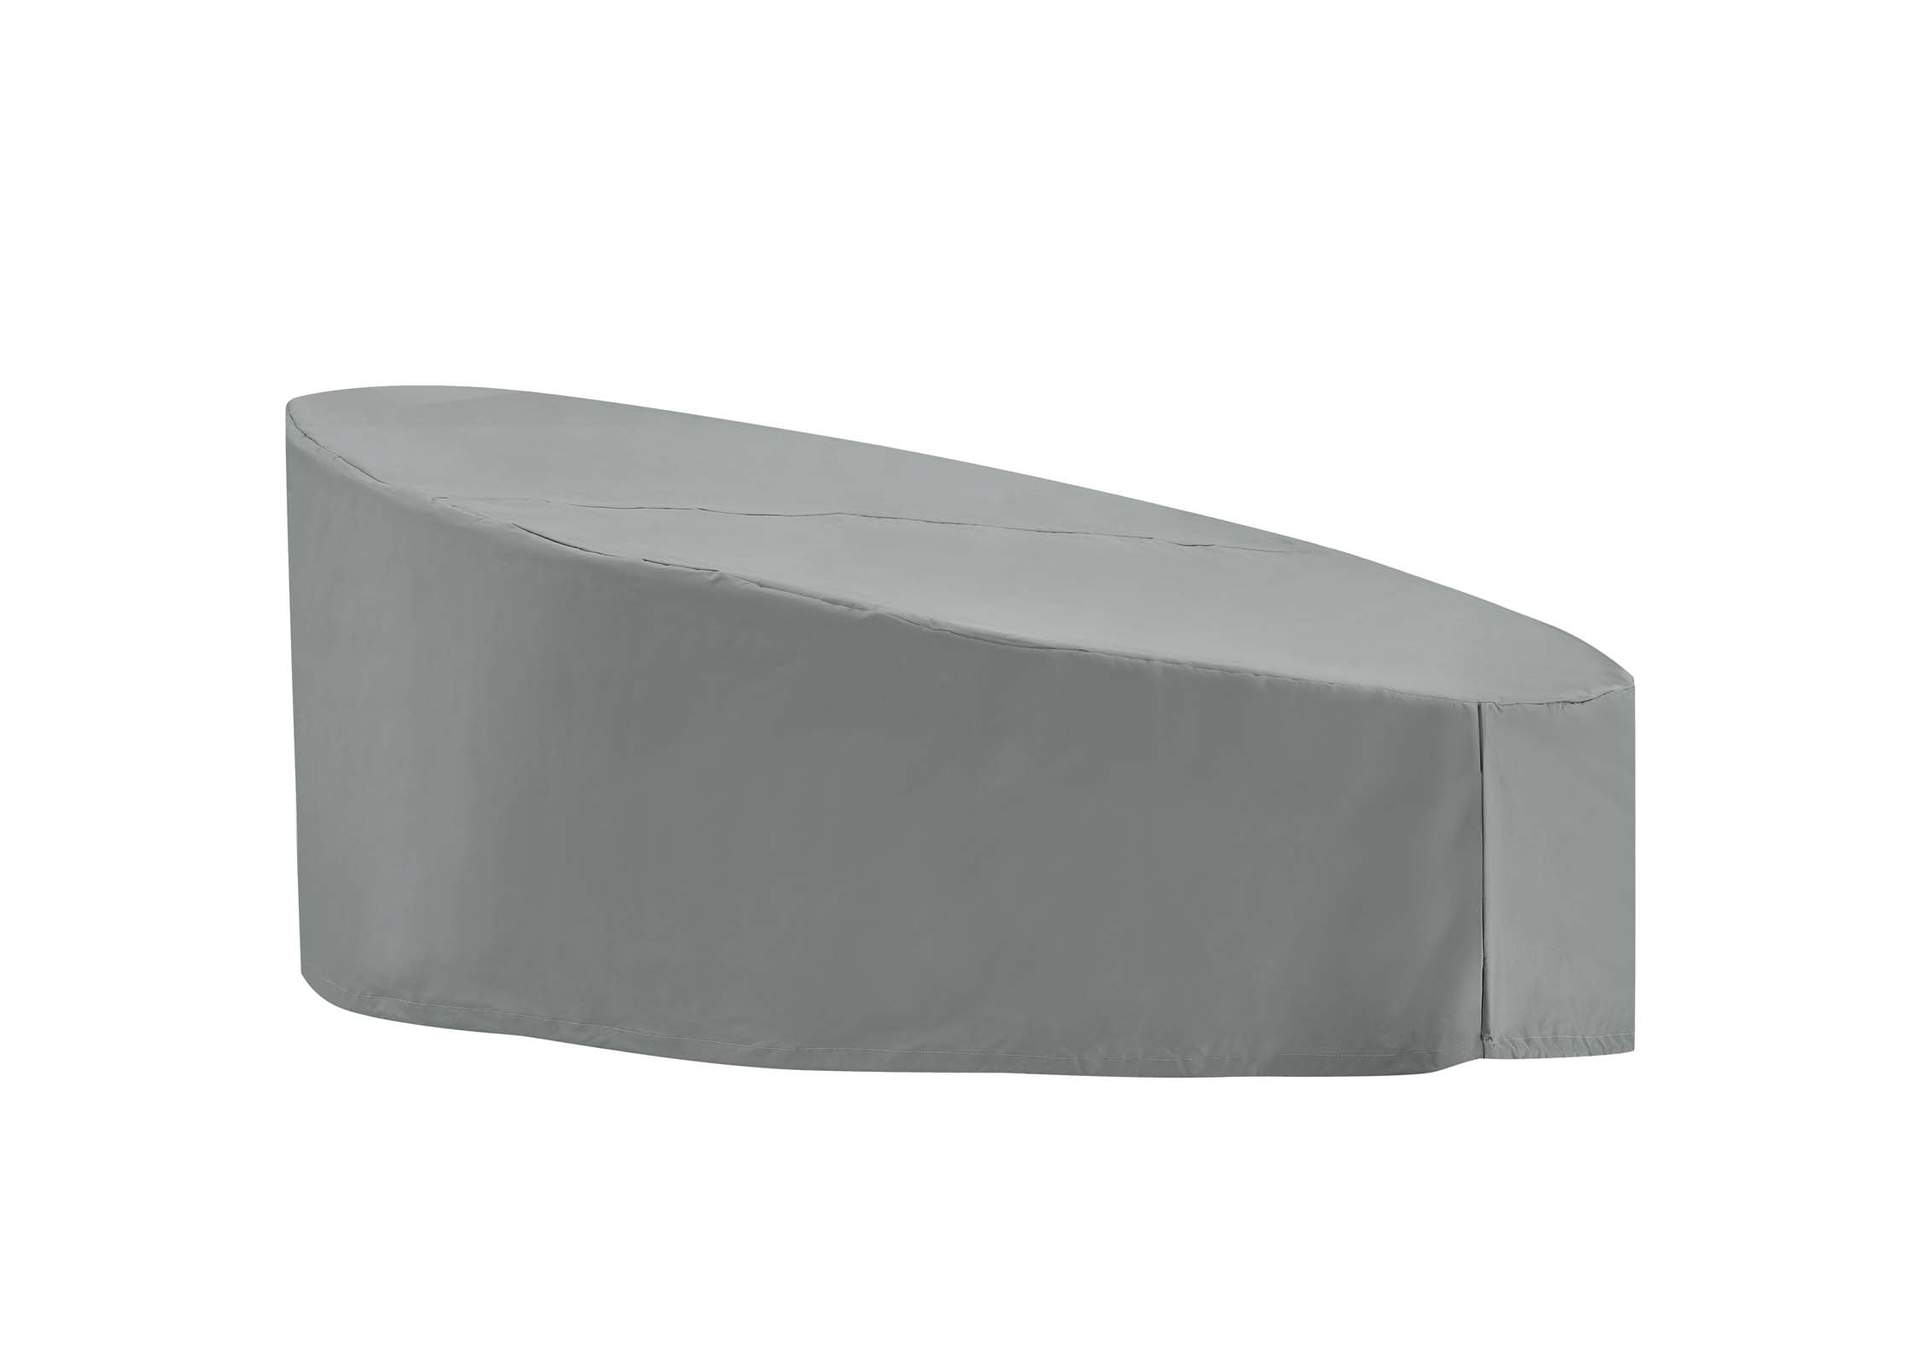 Gray Immerse Taiji / Convene / Sojourn / Summon Daybed Outdoor Patio Furniture Cover,Modway